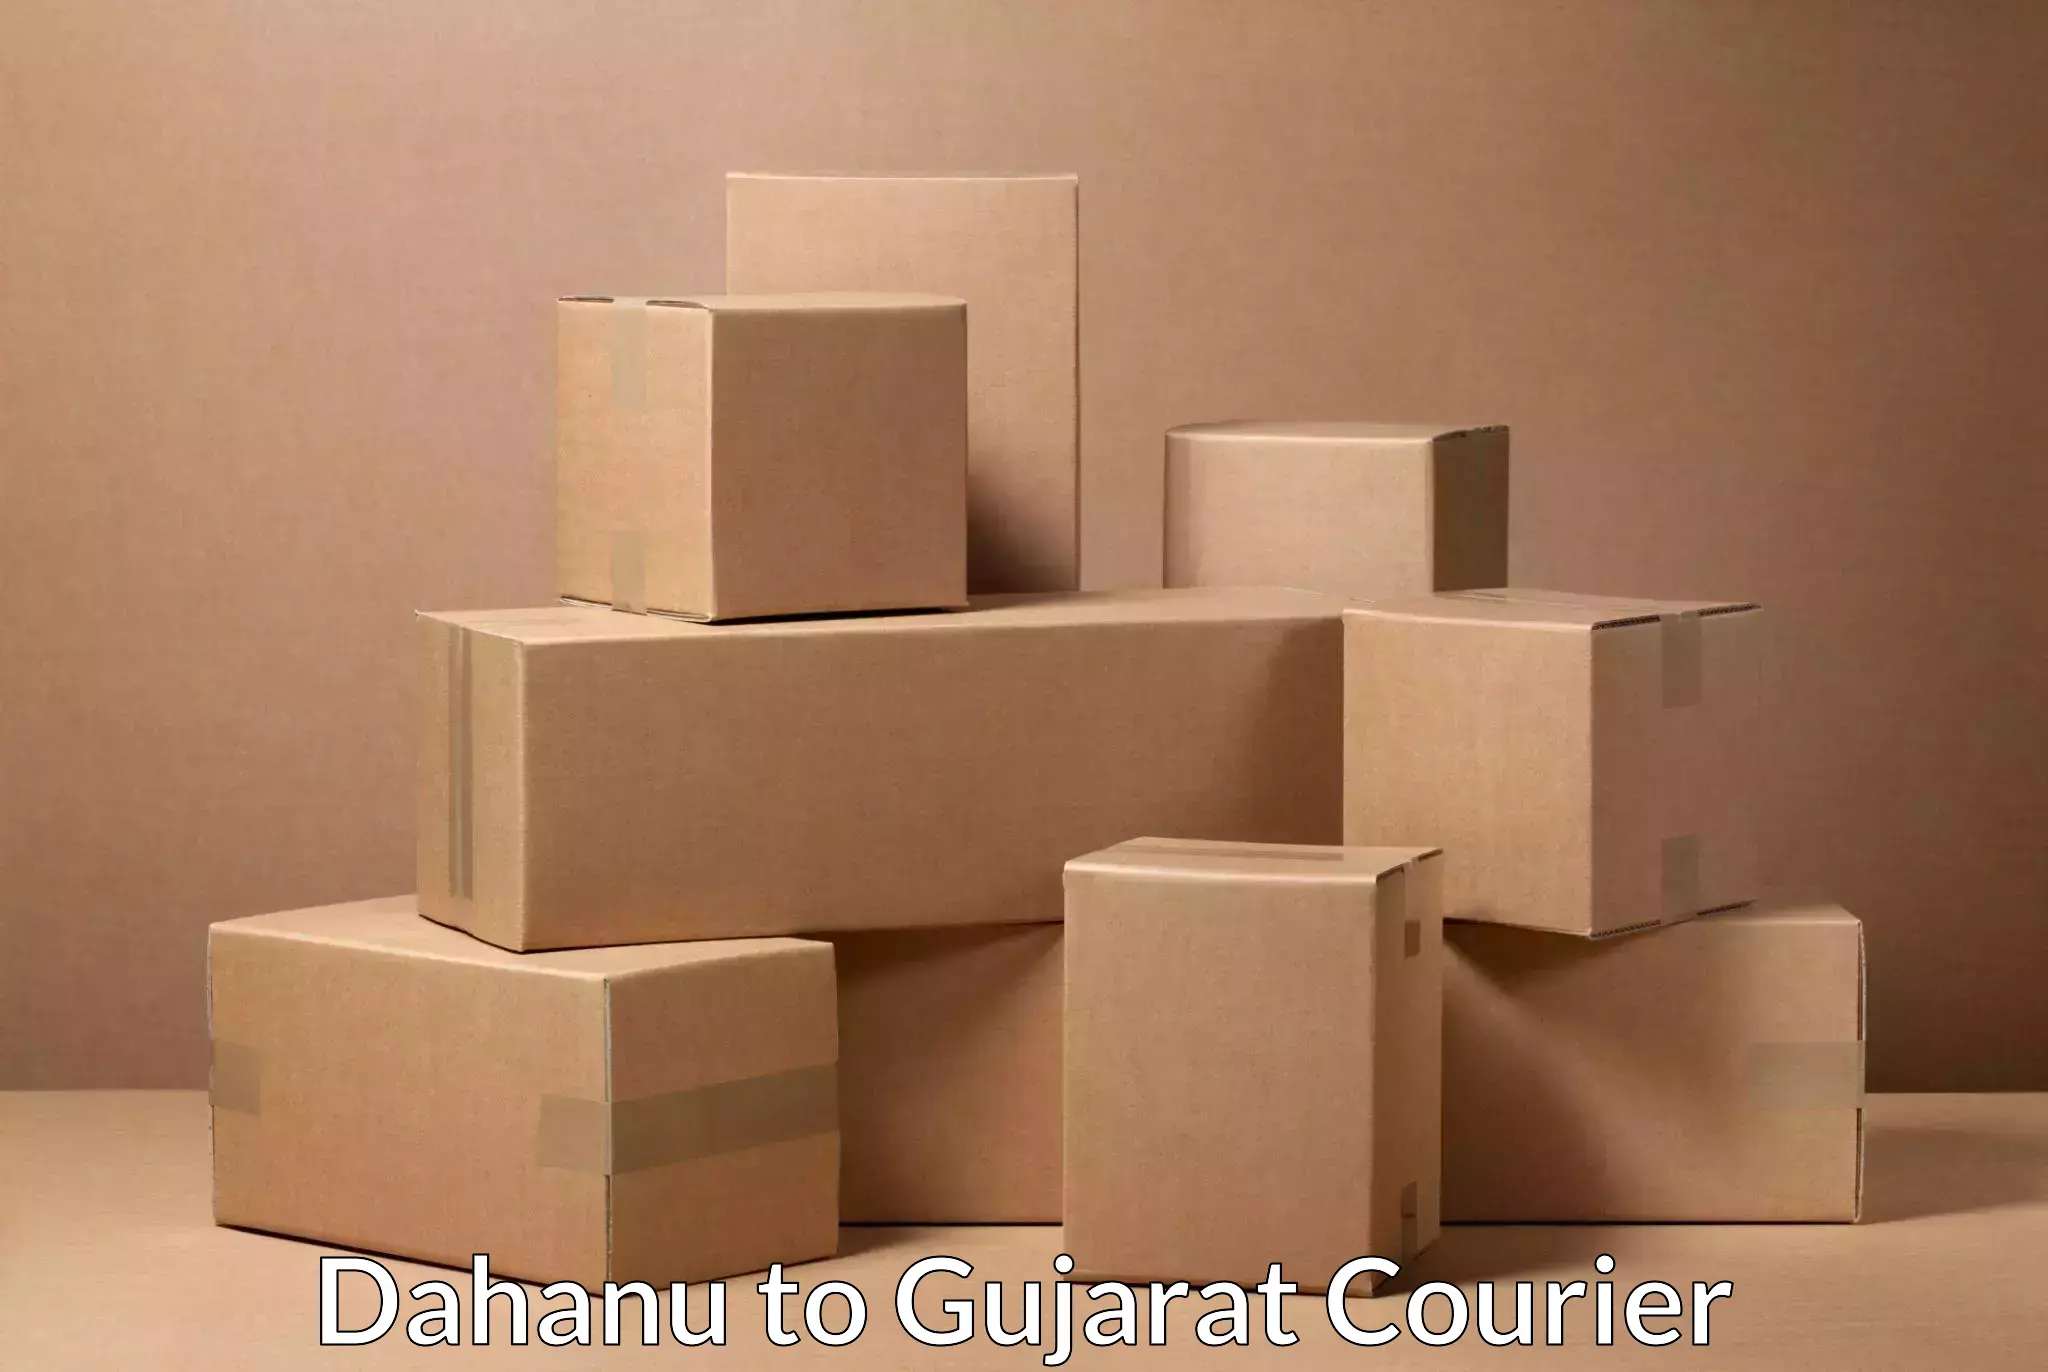 End-to-end delivery Dahanu to Gujarat